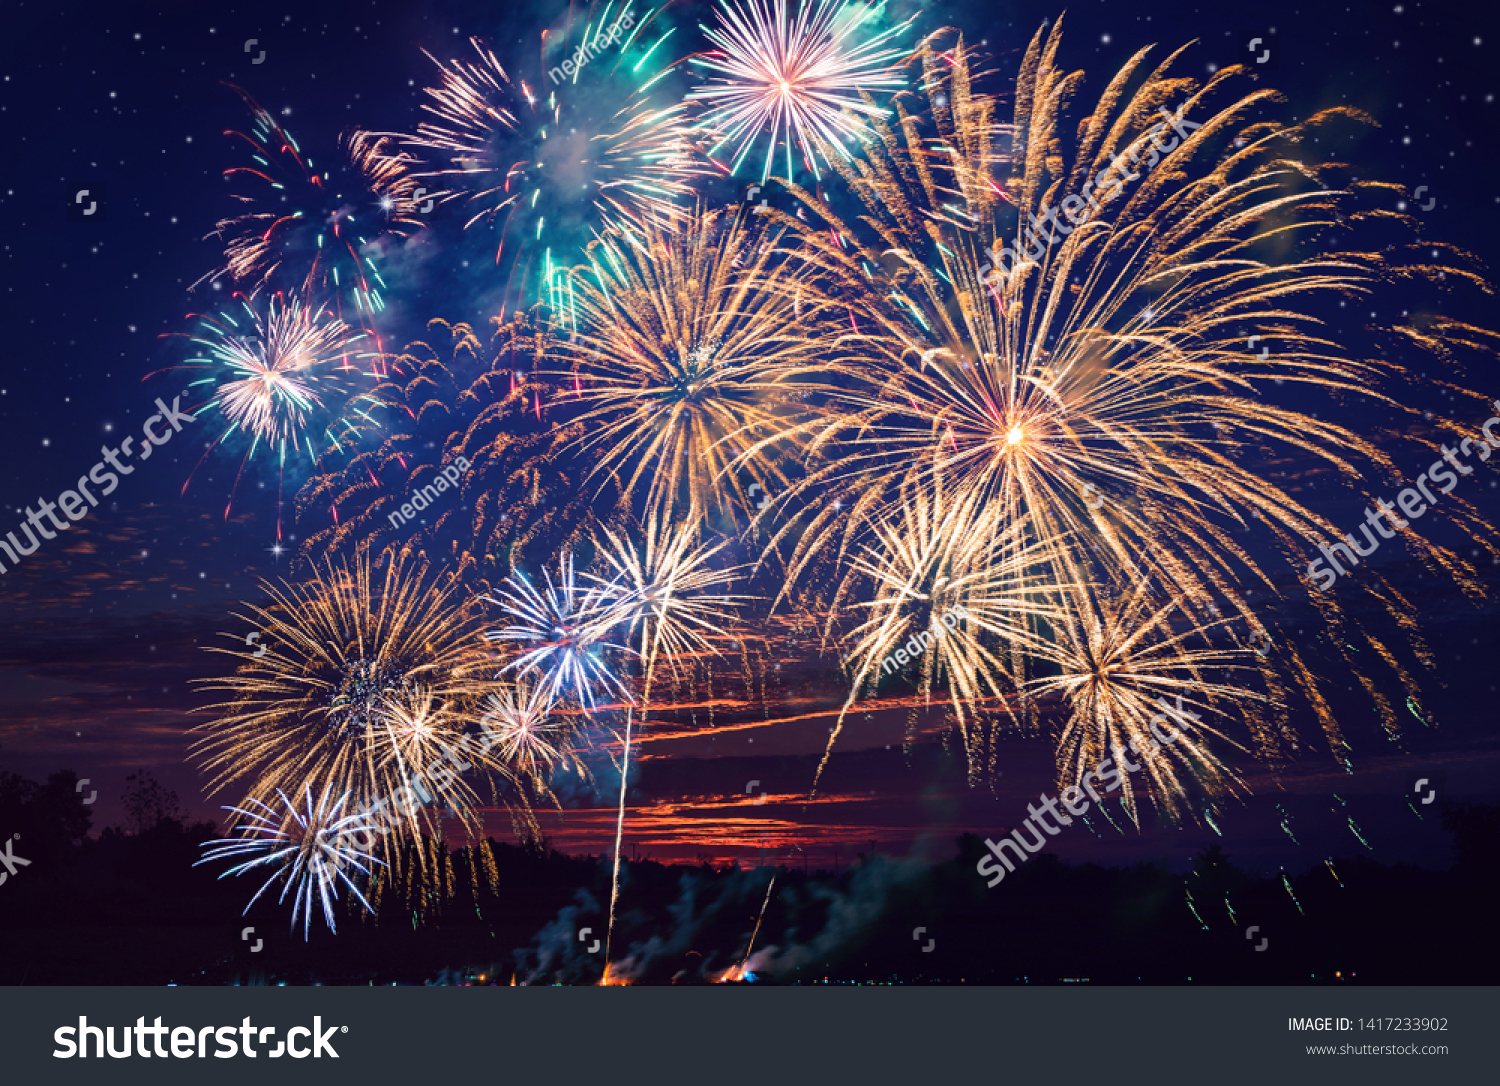 colorful fireworks on the night sky background. #1417233902